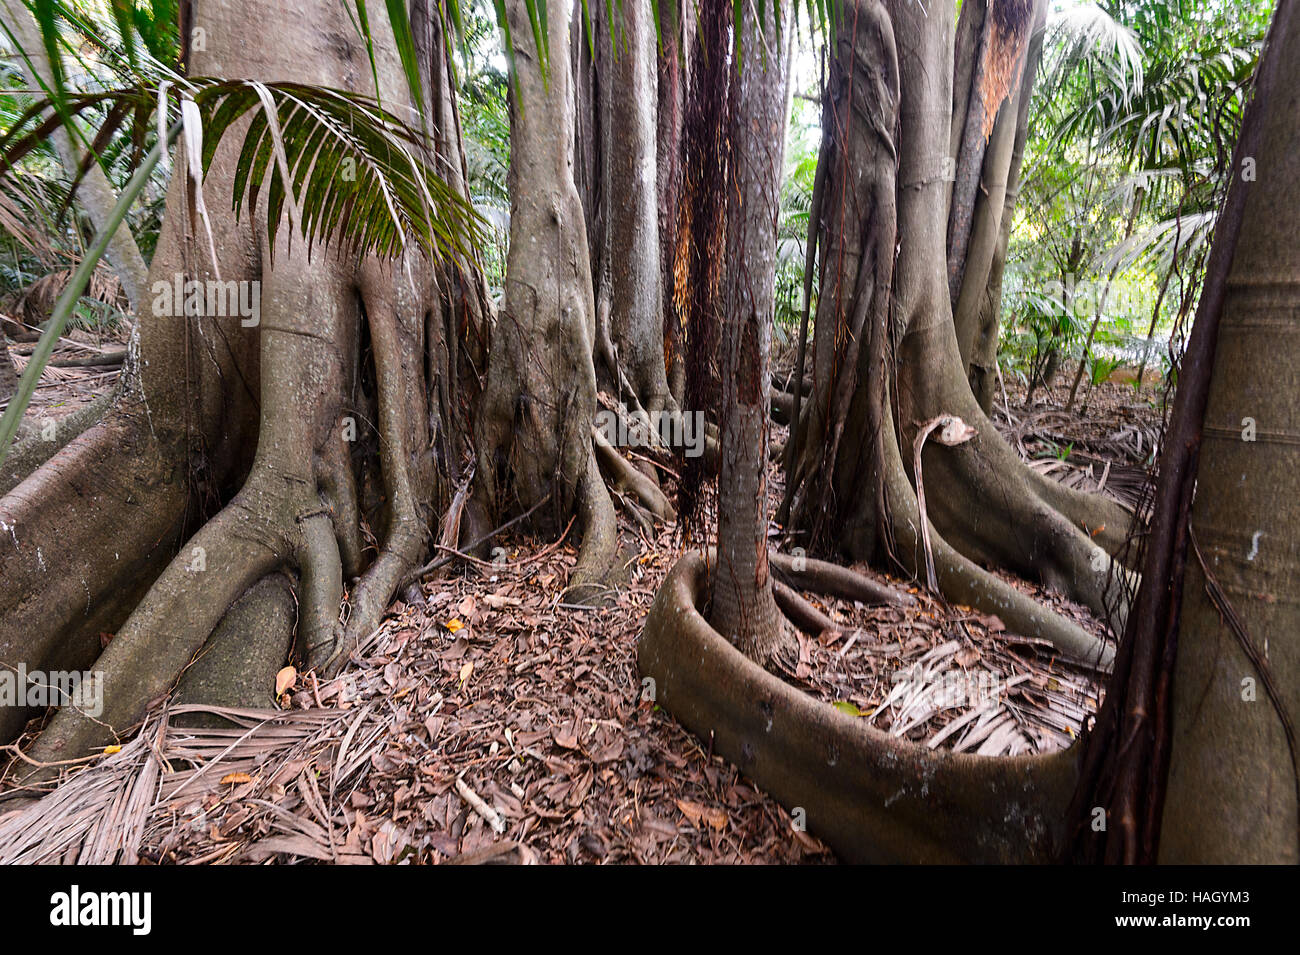 Giant Banyan tree  (Ficus macrophylla columnaris), endemic to Lord Howe Island, New South Wales, NSW, Australia Stock Photo